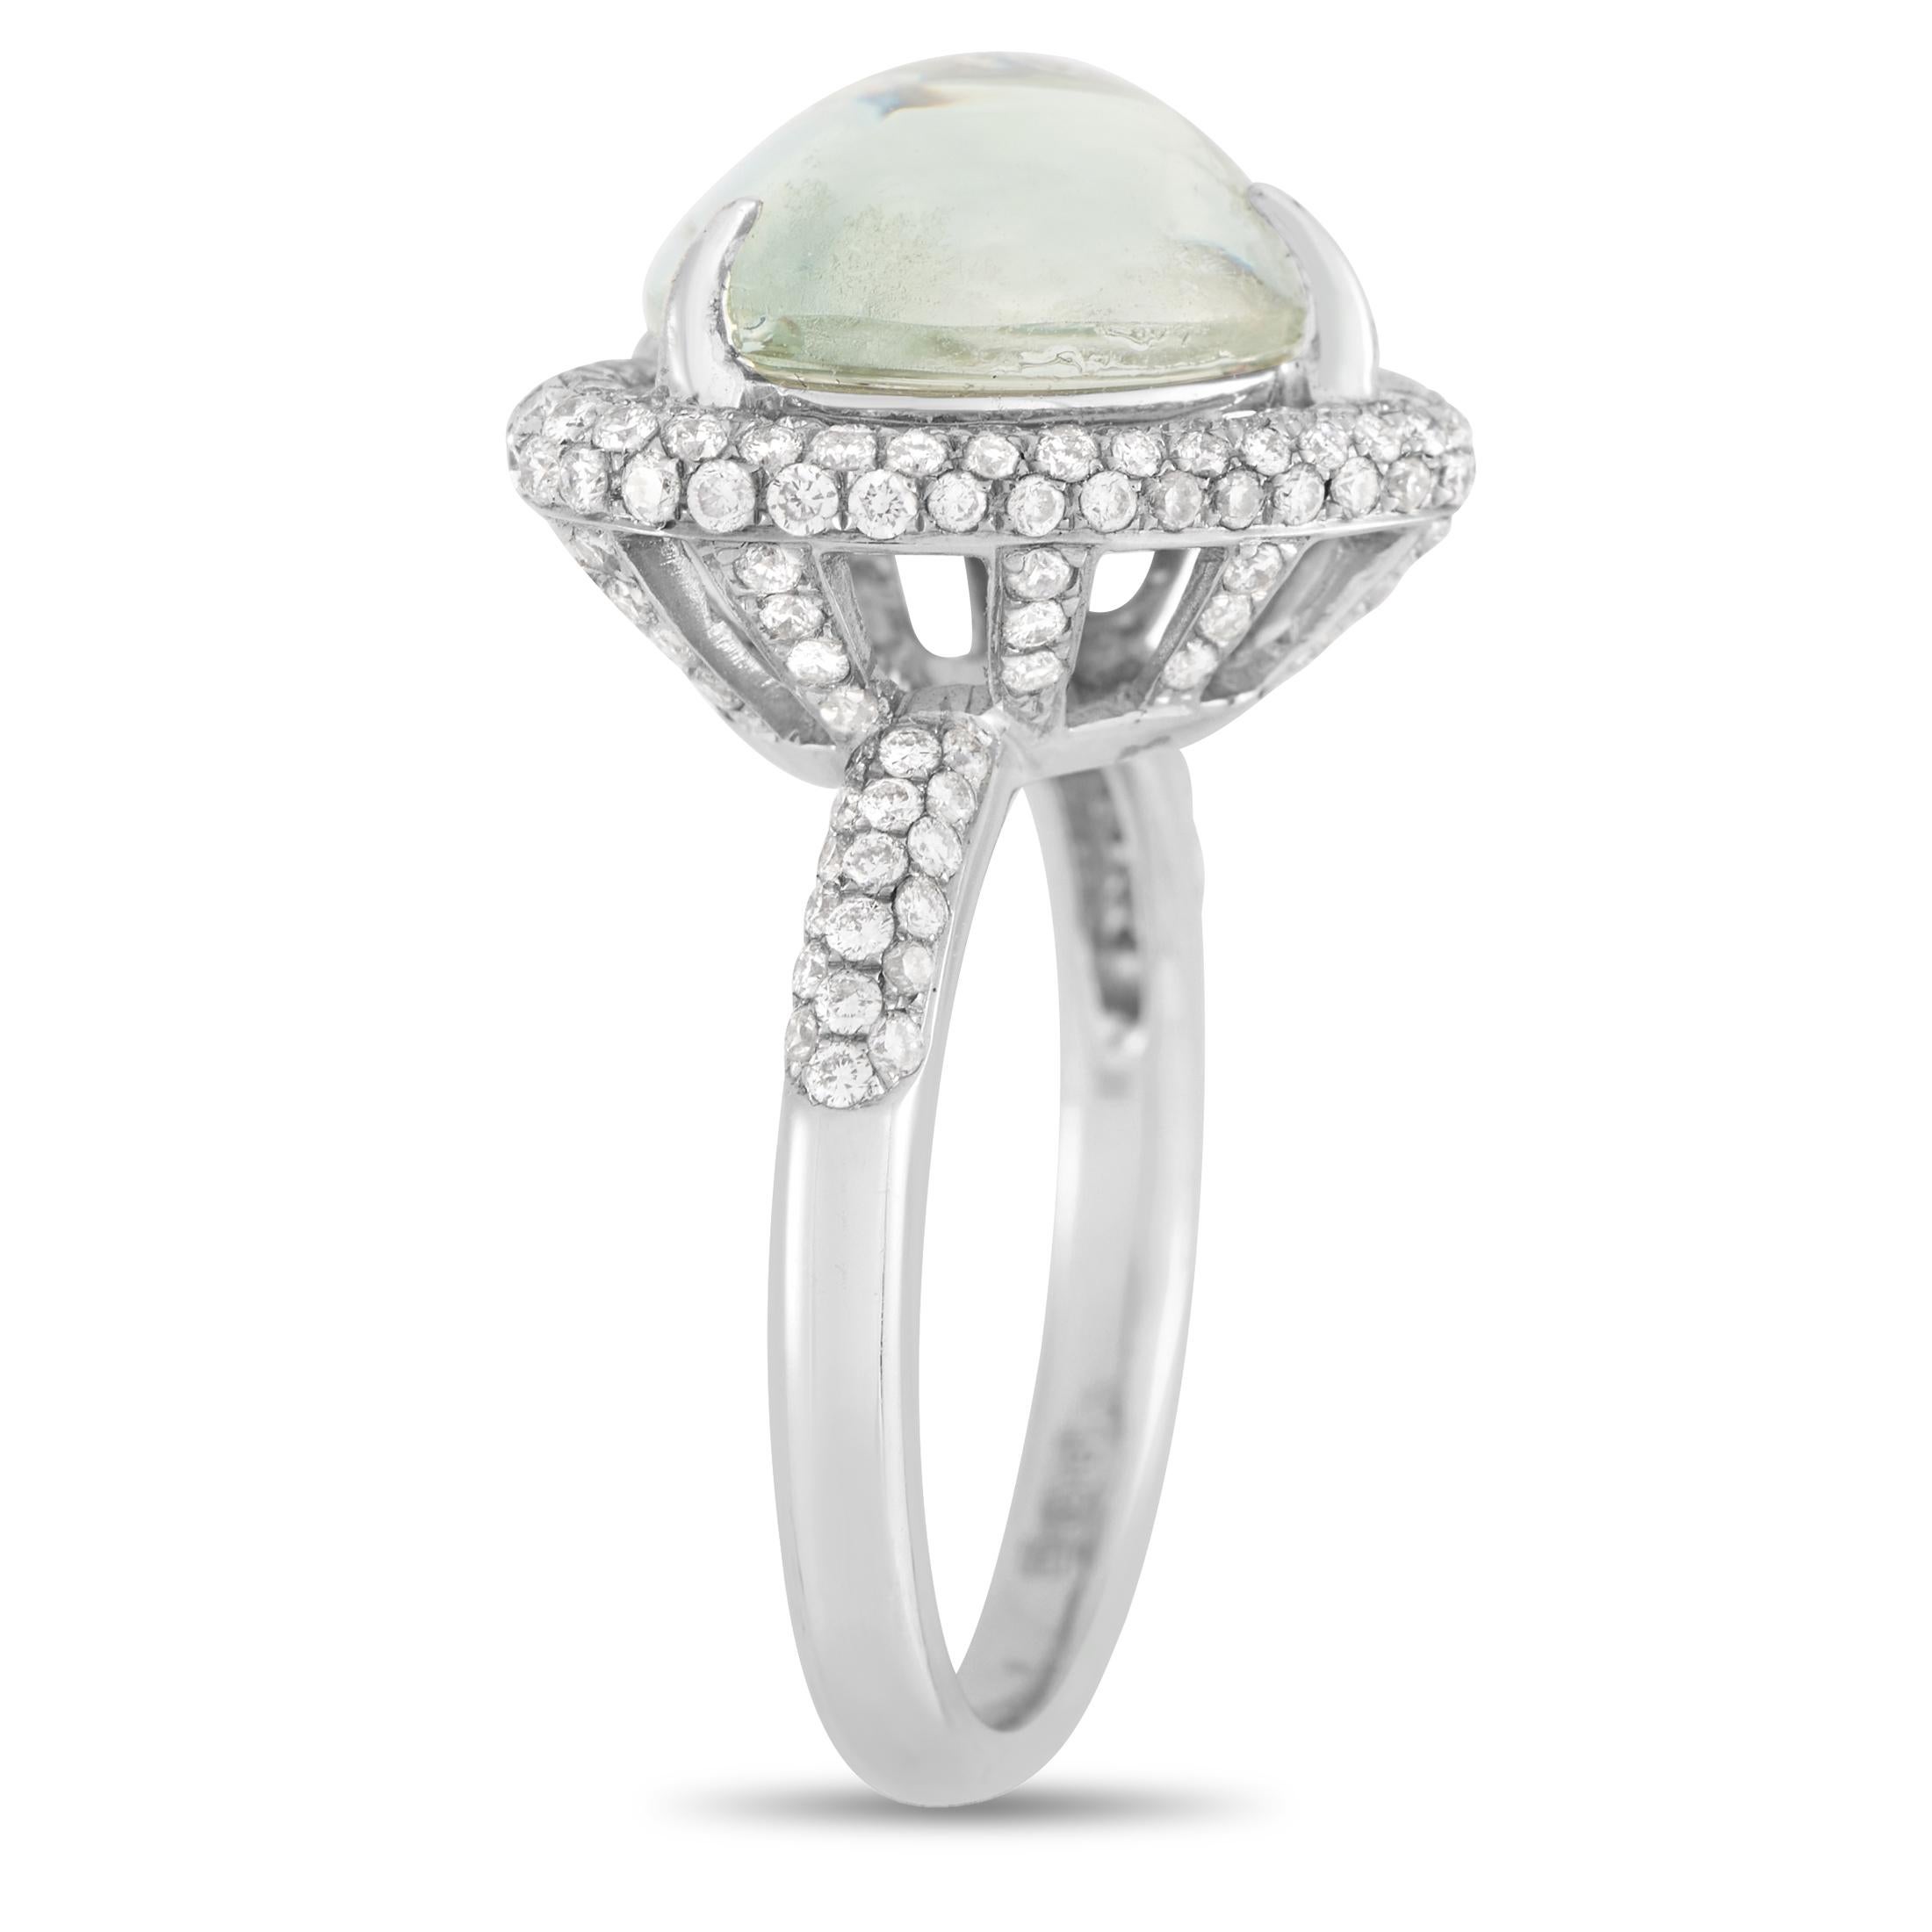 A unique pairing of gemstones comes to life thanks to this ring’s exquisite heart-shaped setting. A green amethyst heart makes a statement at the center of the elegant design. It’s also beautifully showcased by diamond accents totaling 1.34 carats.